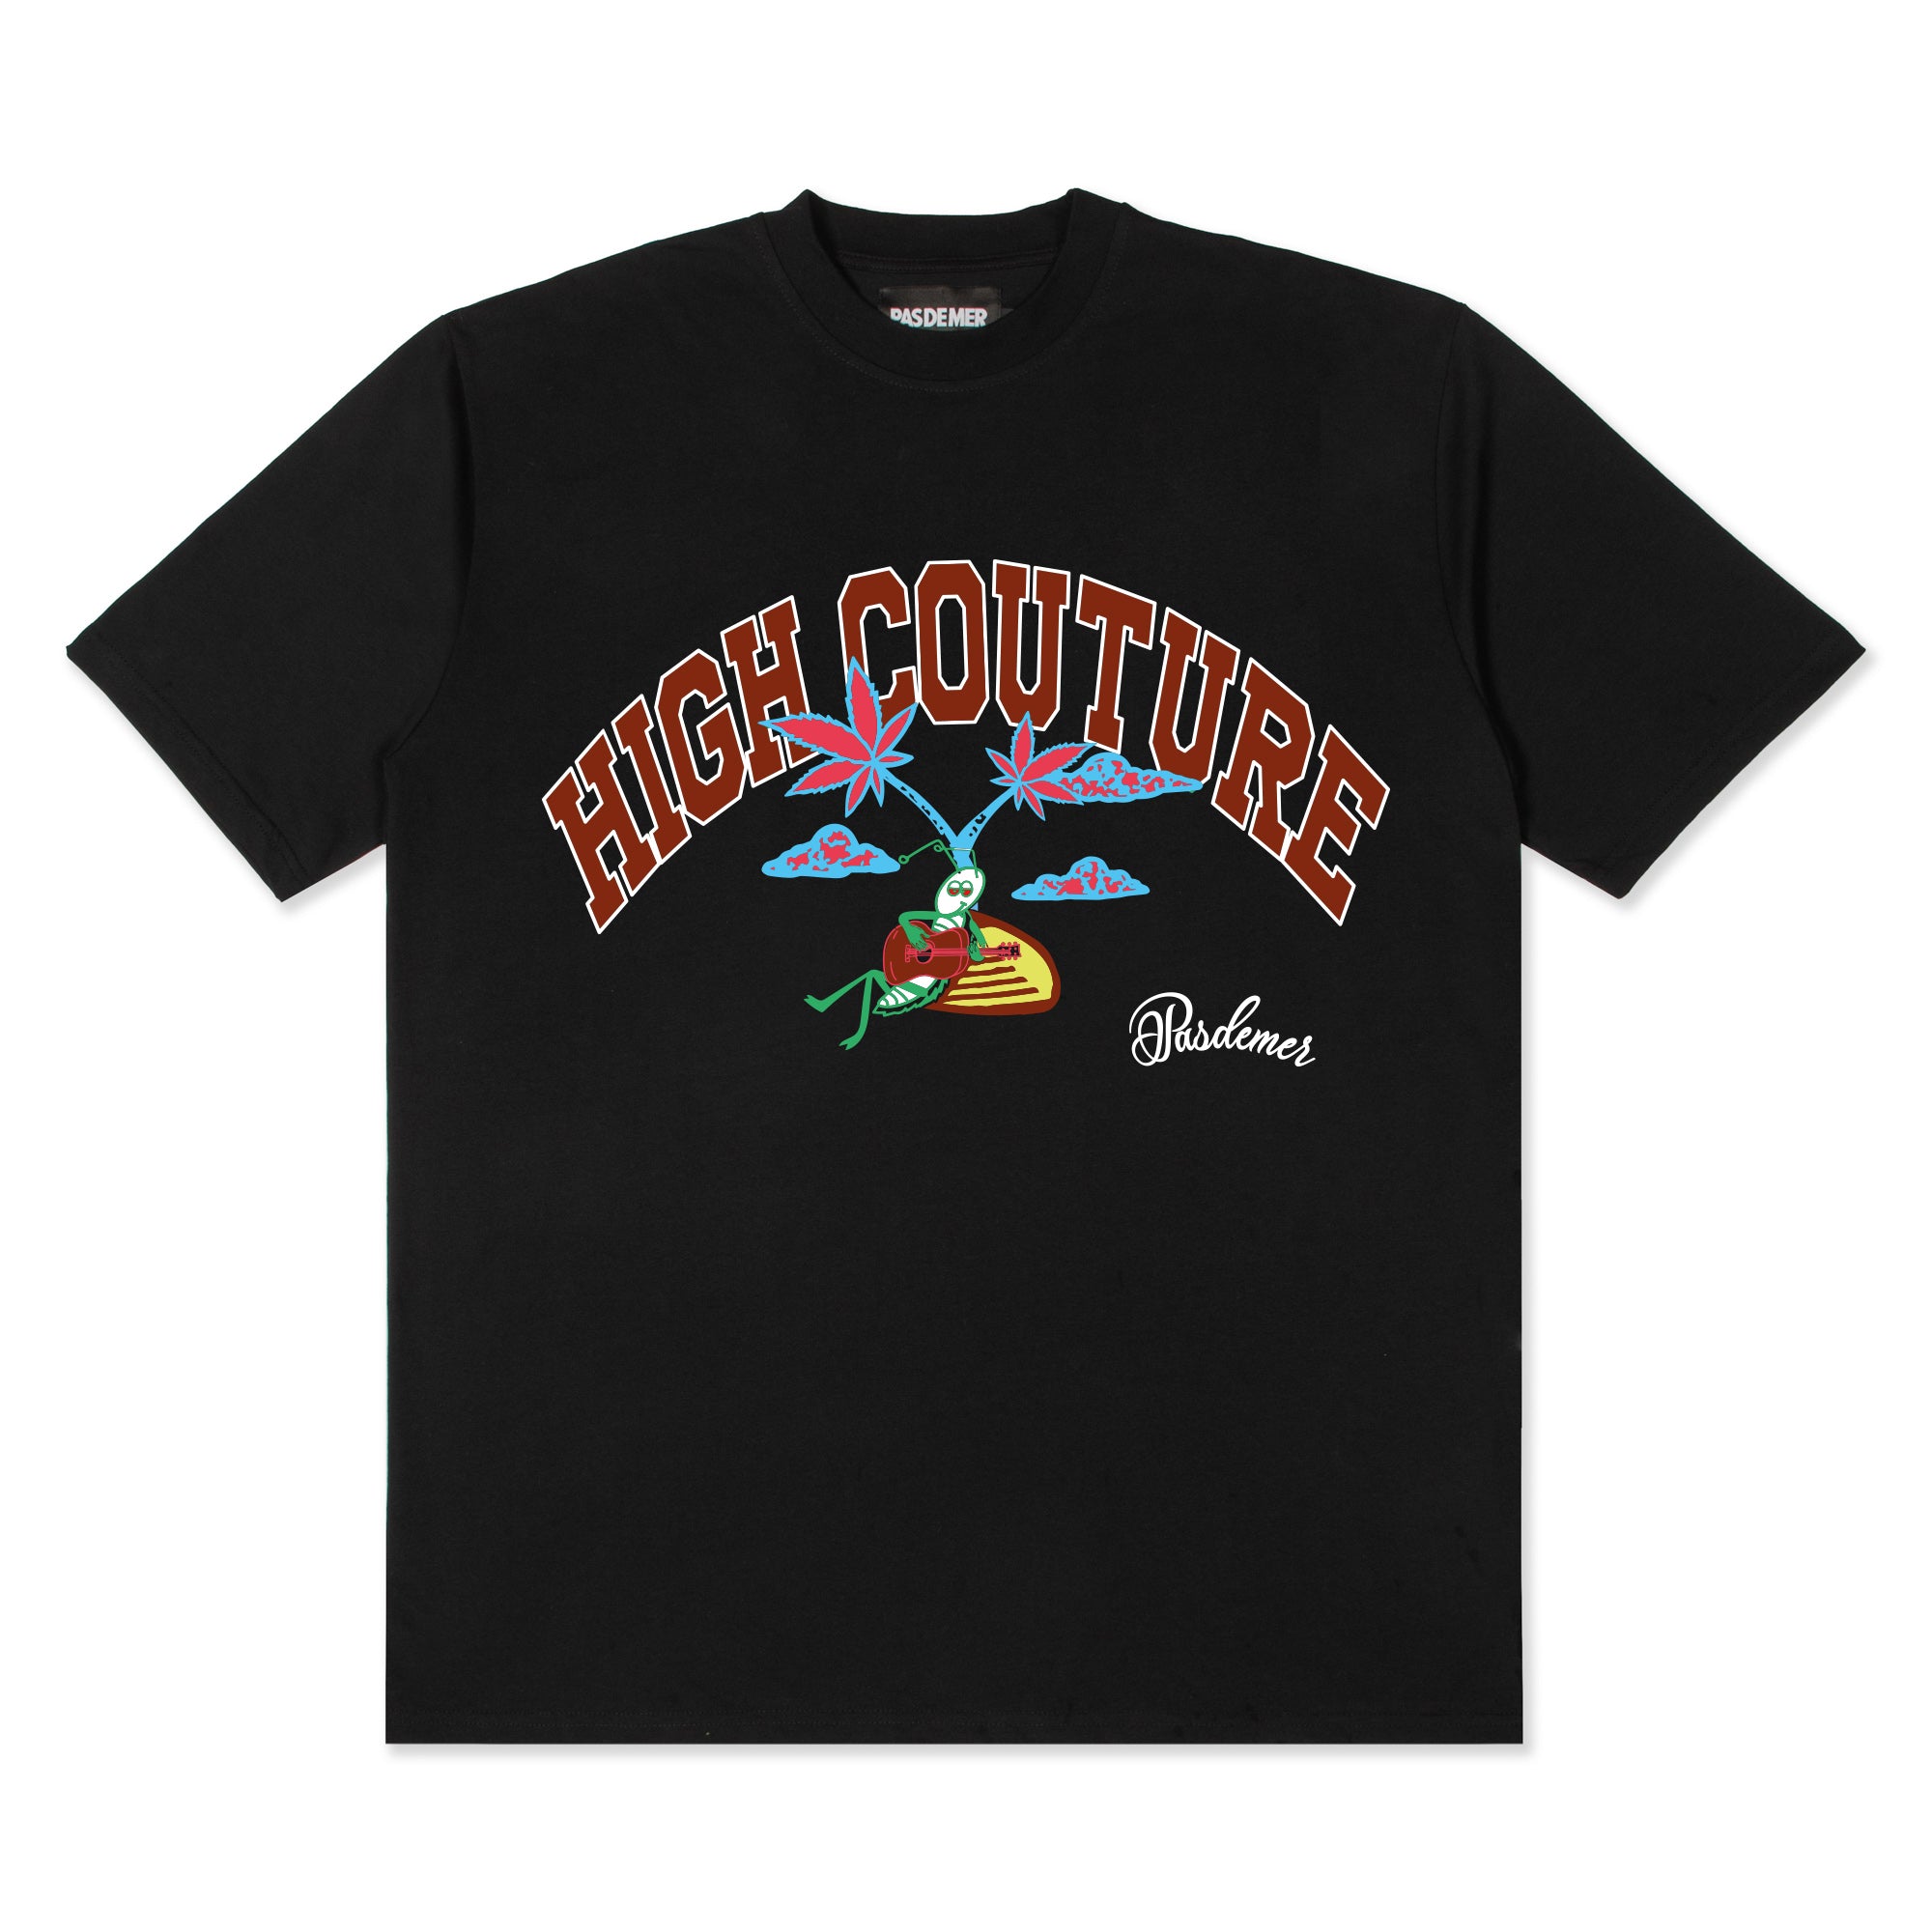 High Couture T-Shirt